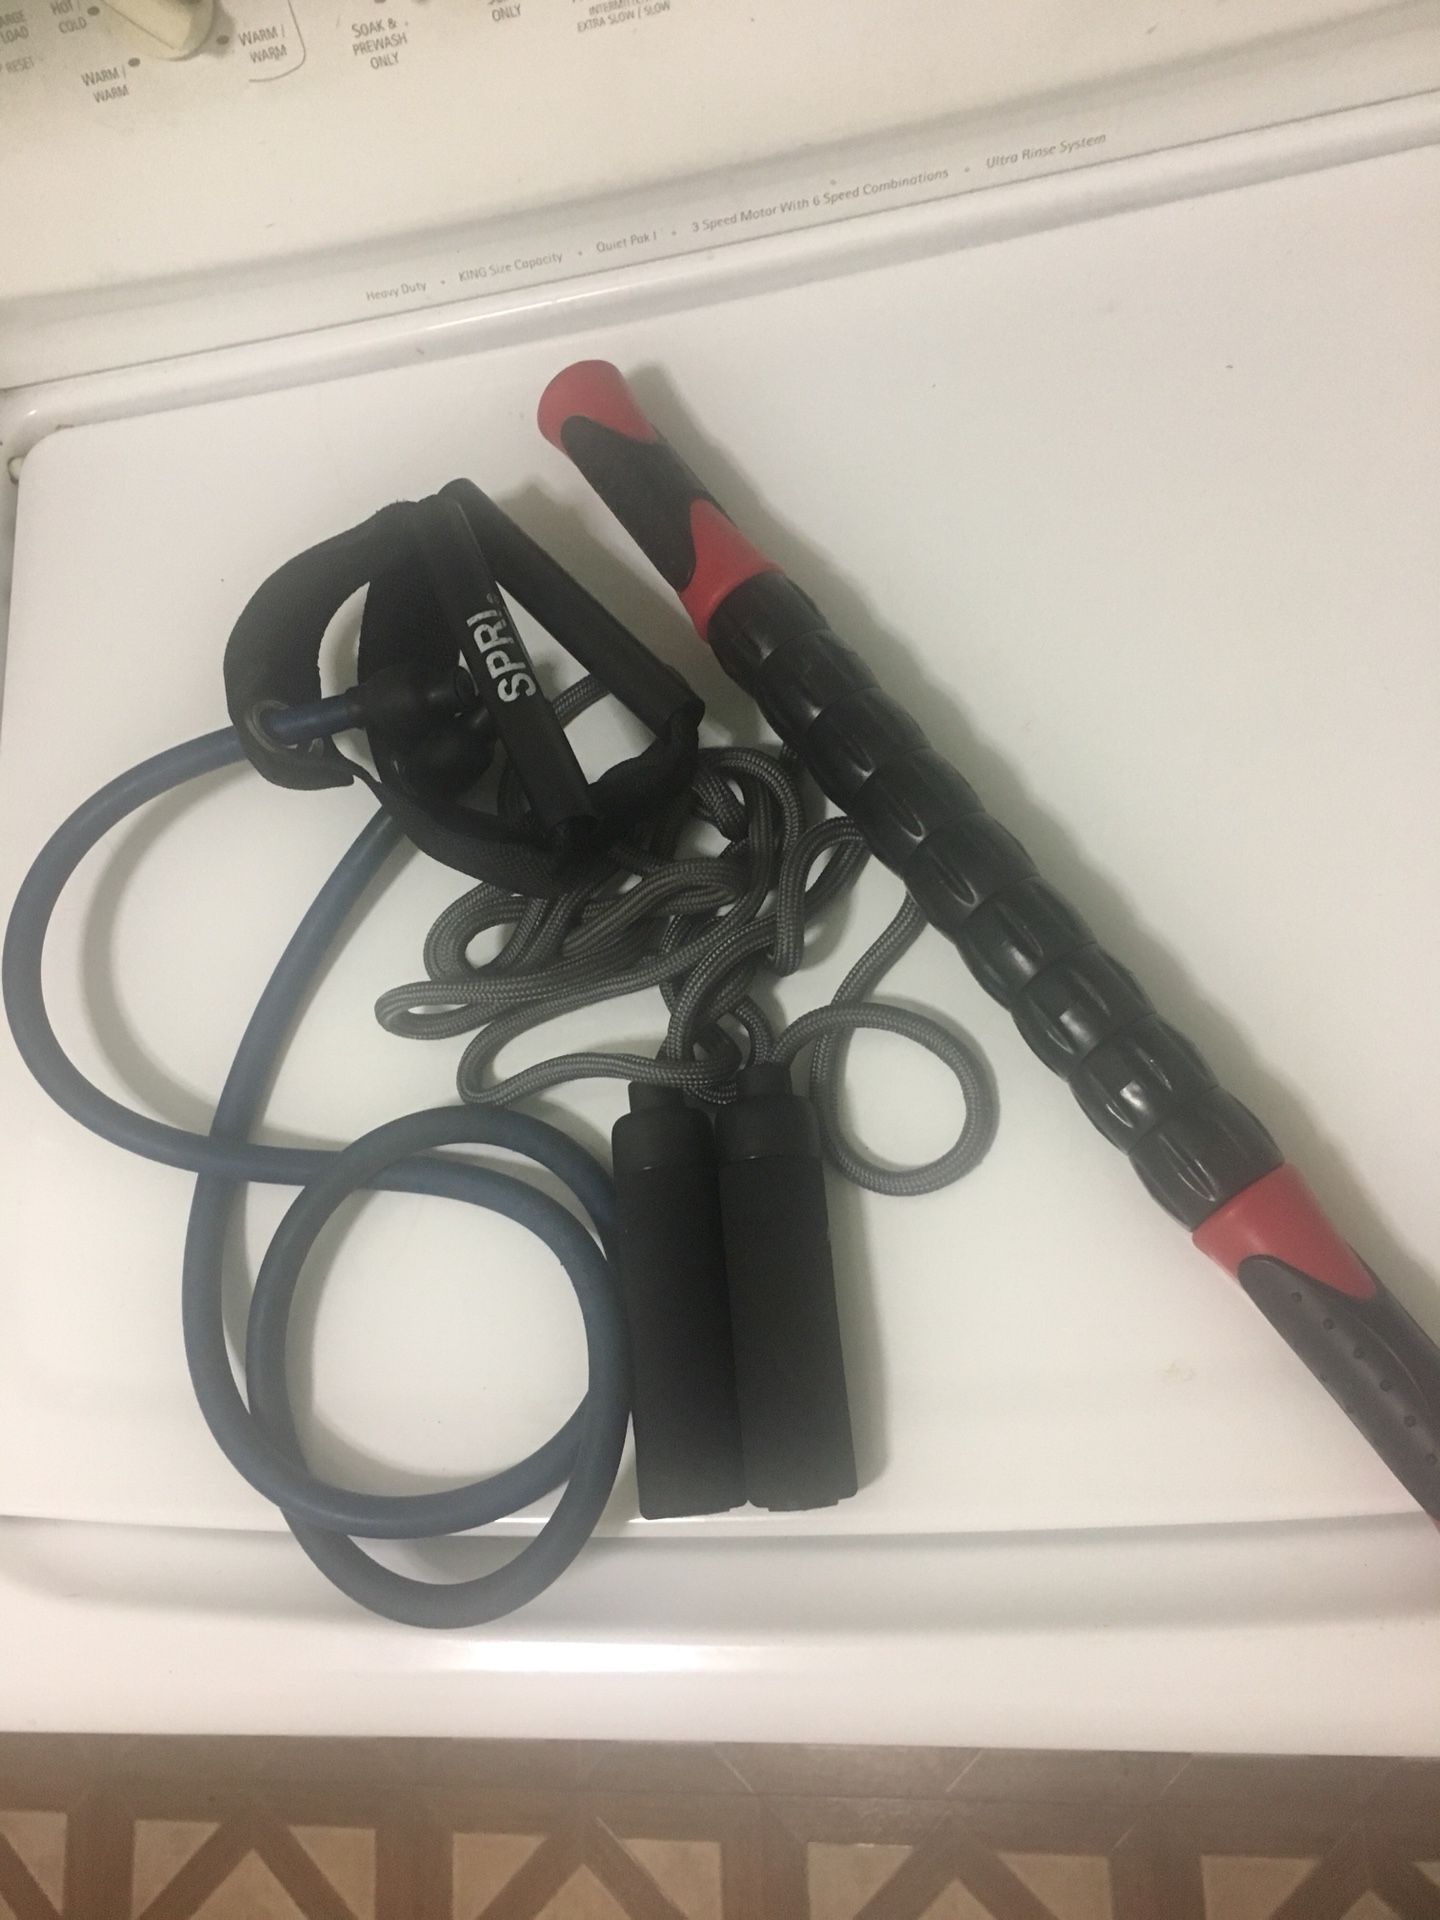 Lot of exercise items